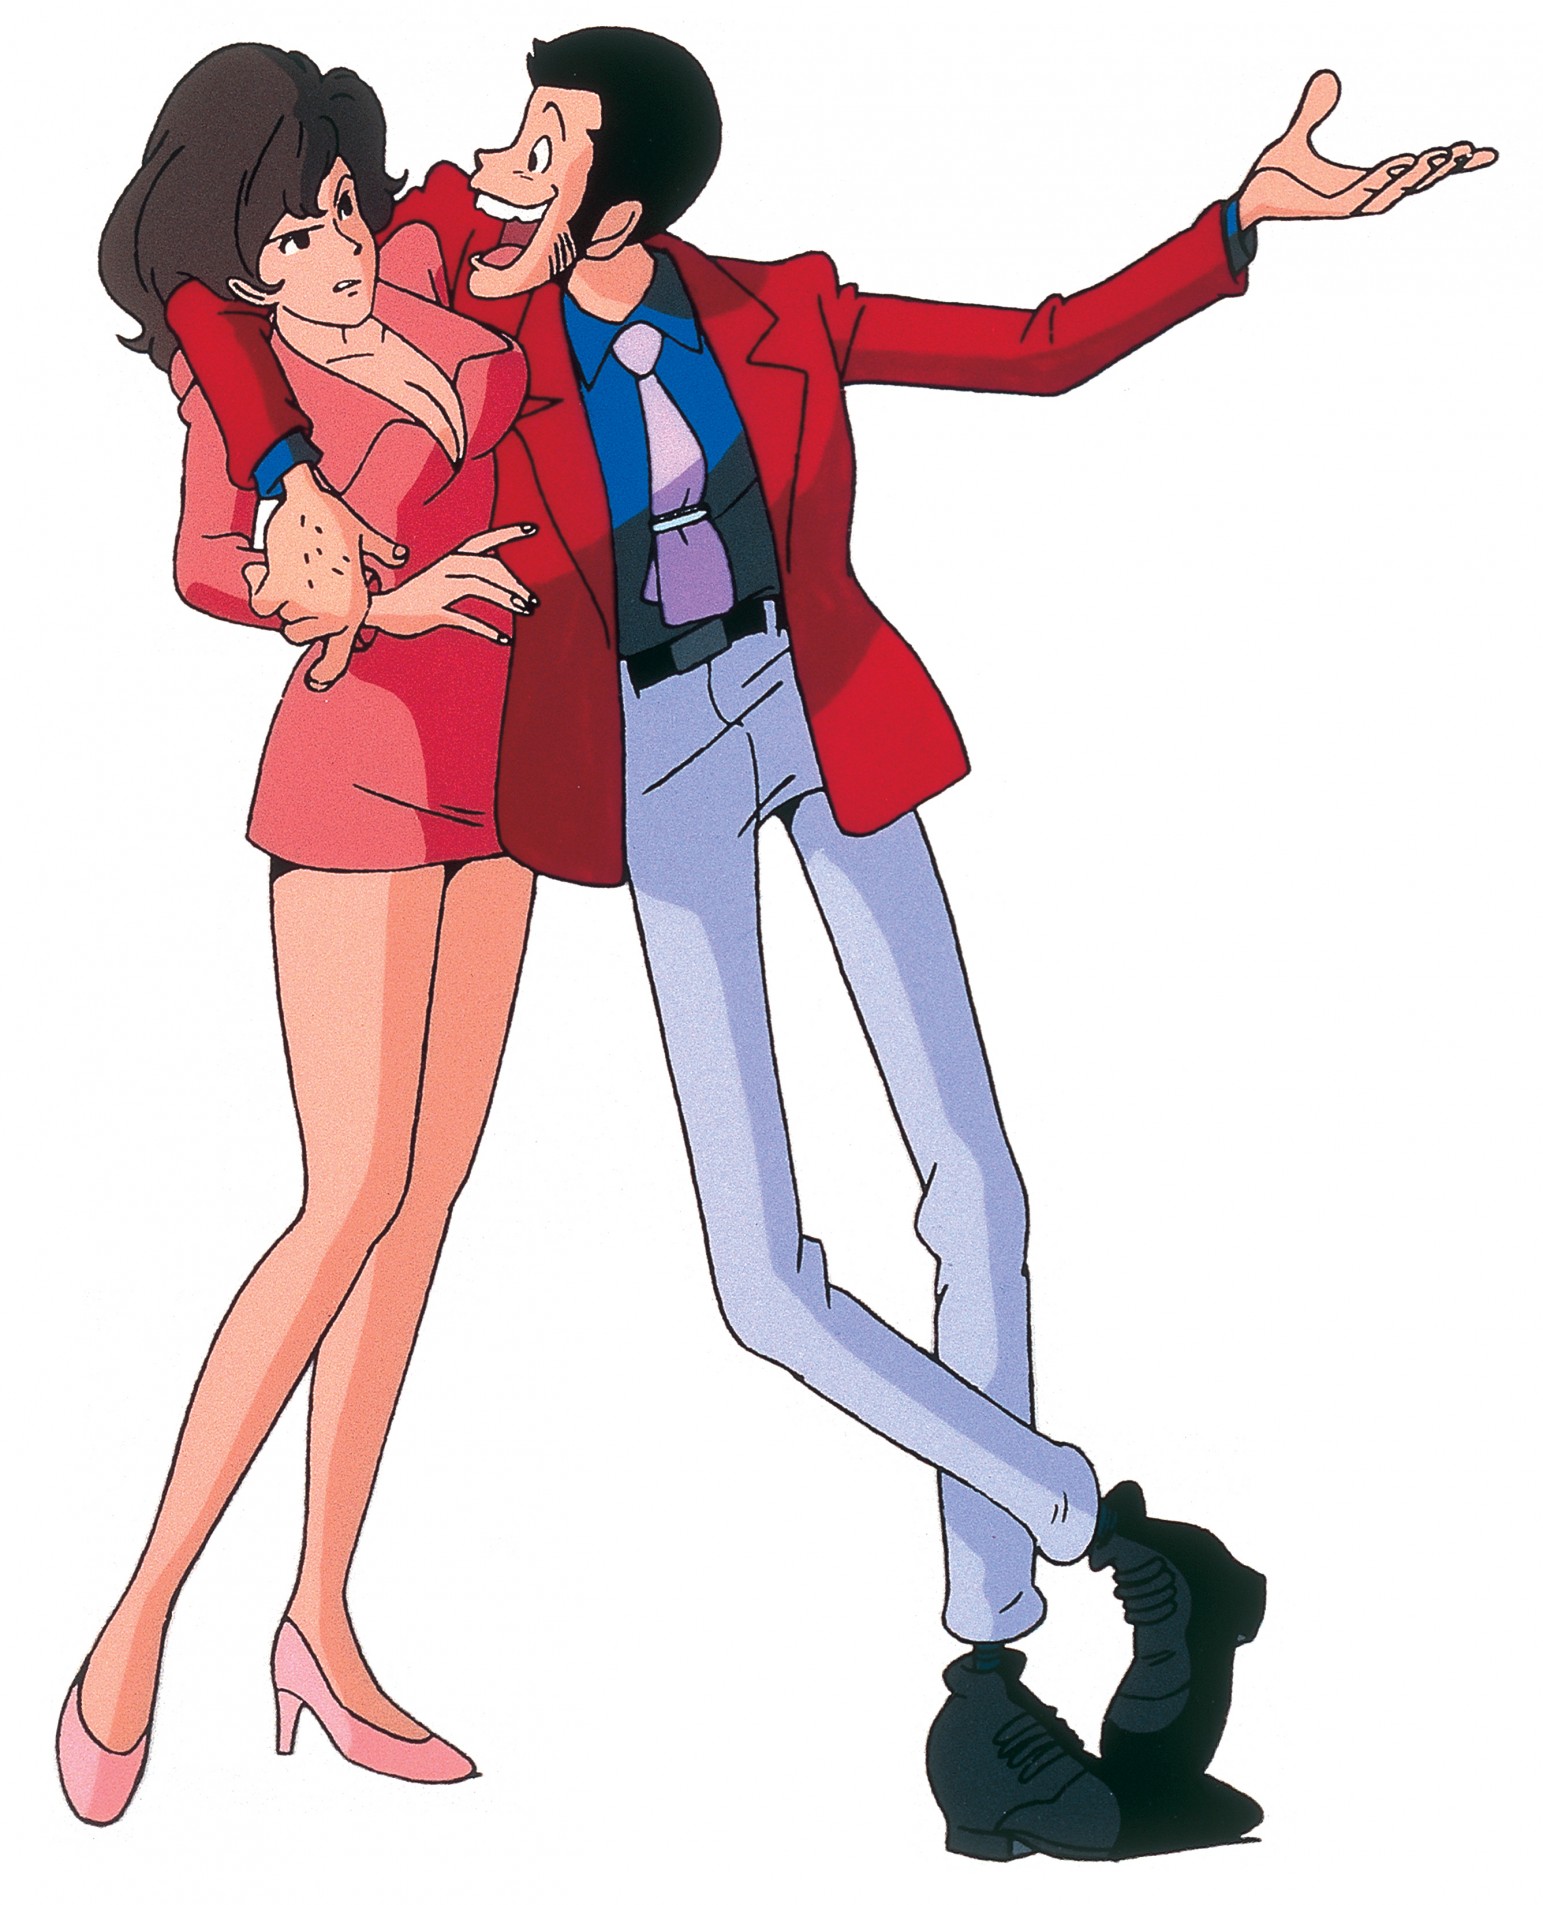 High Resolution Wallpaper | Lupin The Third 1543x1905 px